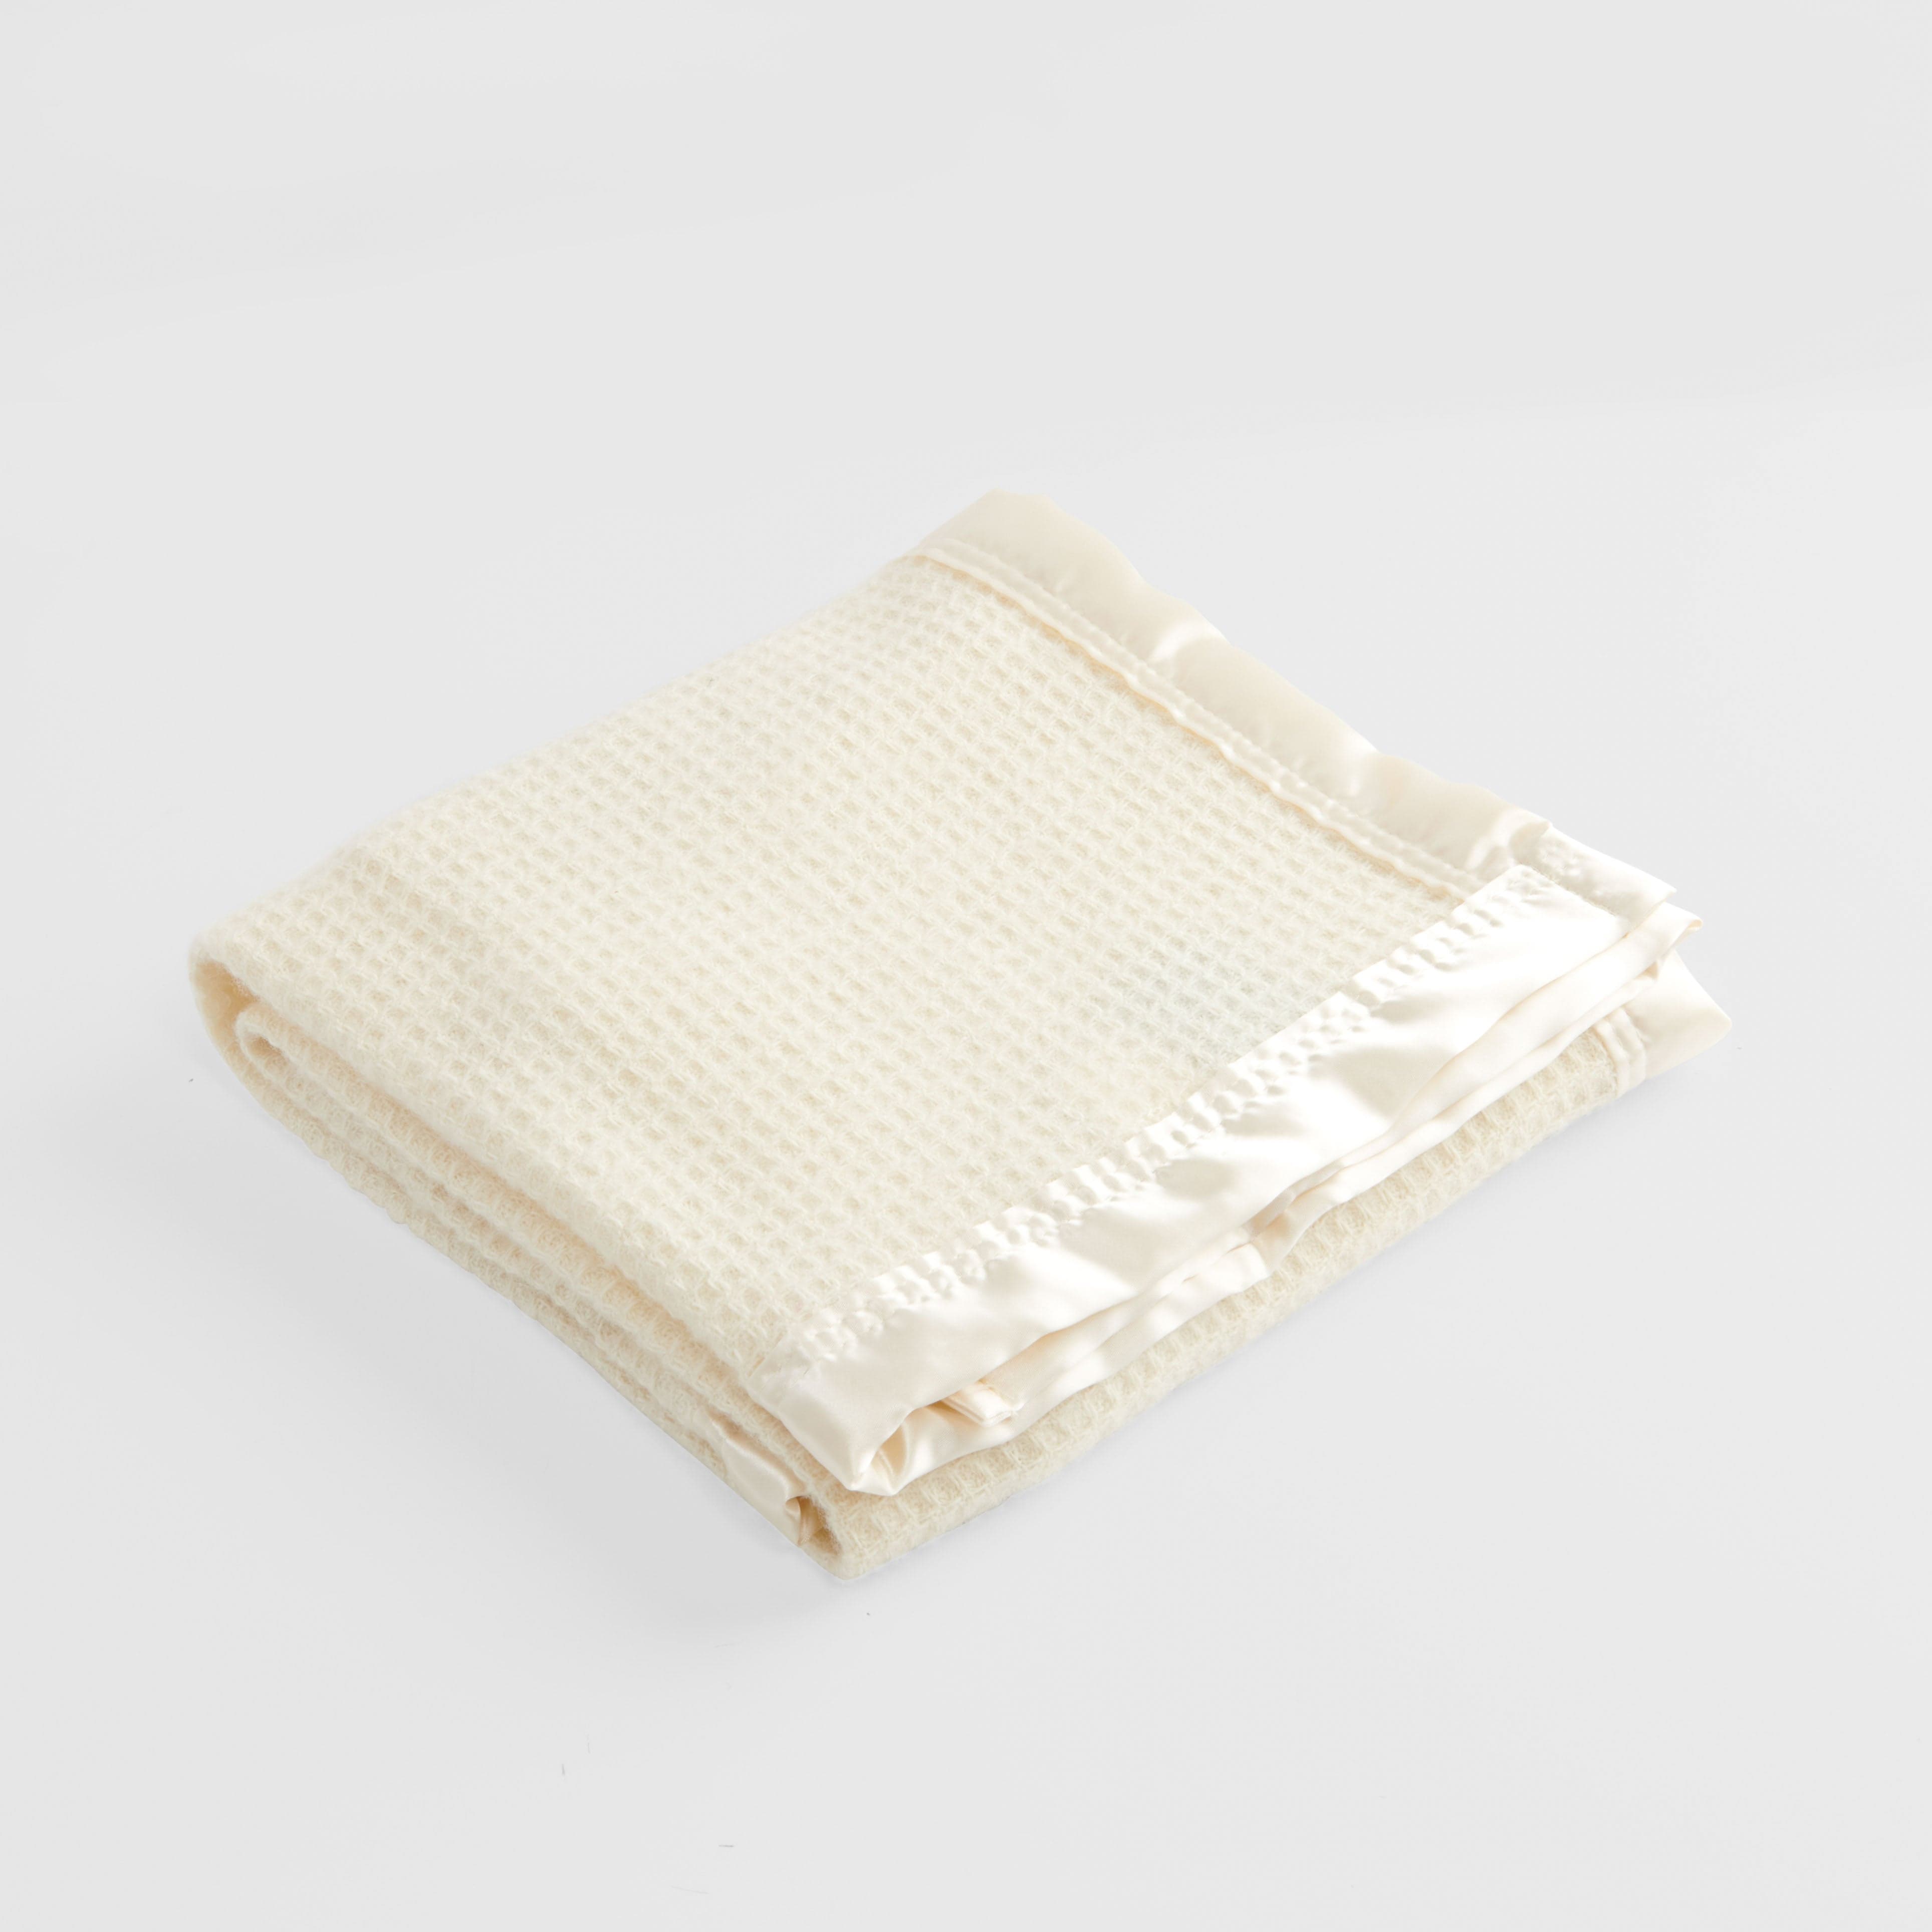 WM 60Day Campaign Range 29 Micron;Blanket Merino Waffle Nursery Blanket Natural with Natural Satin Cot